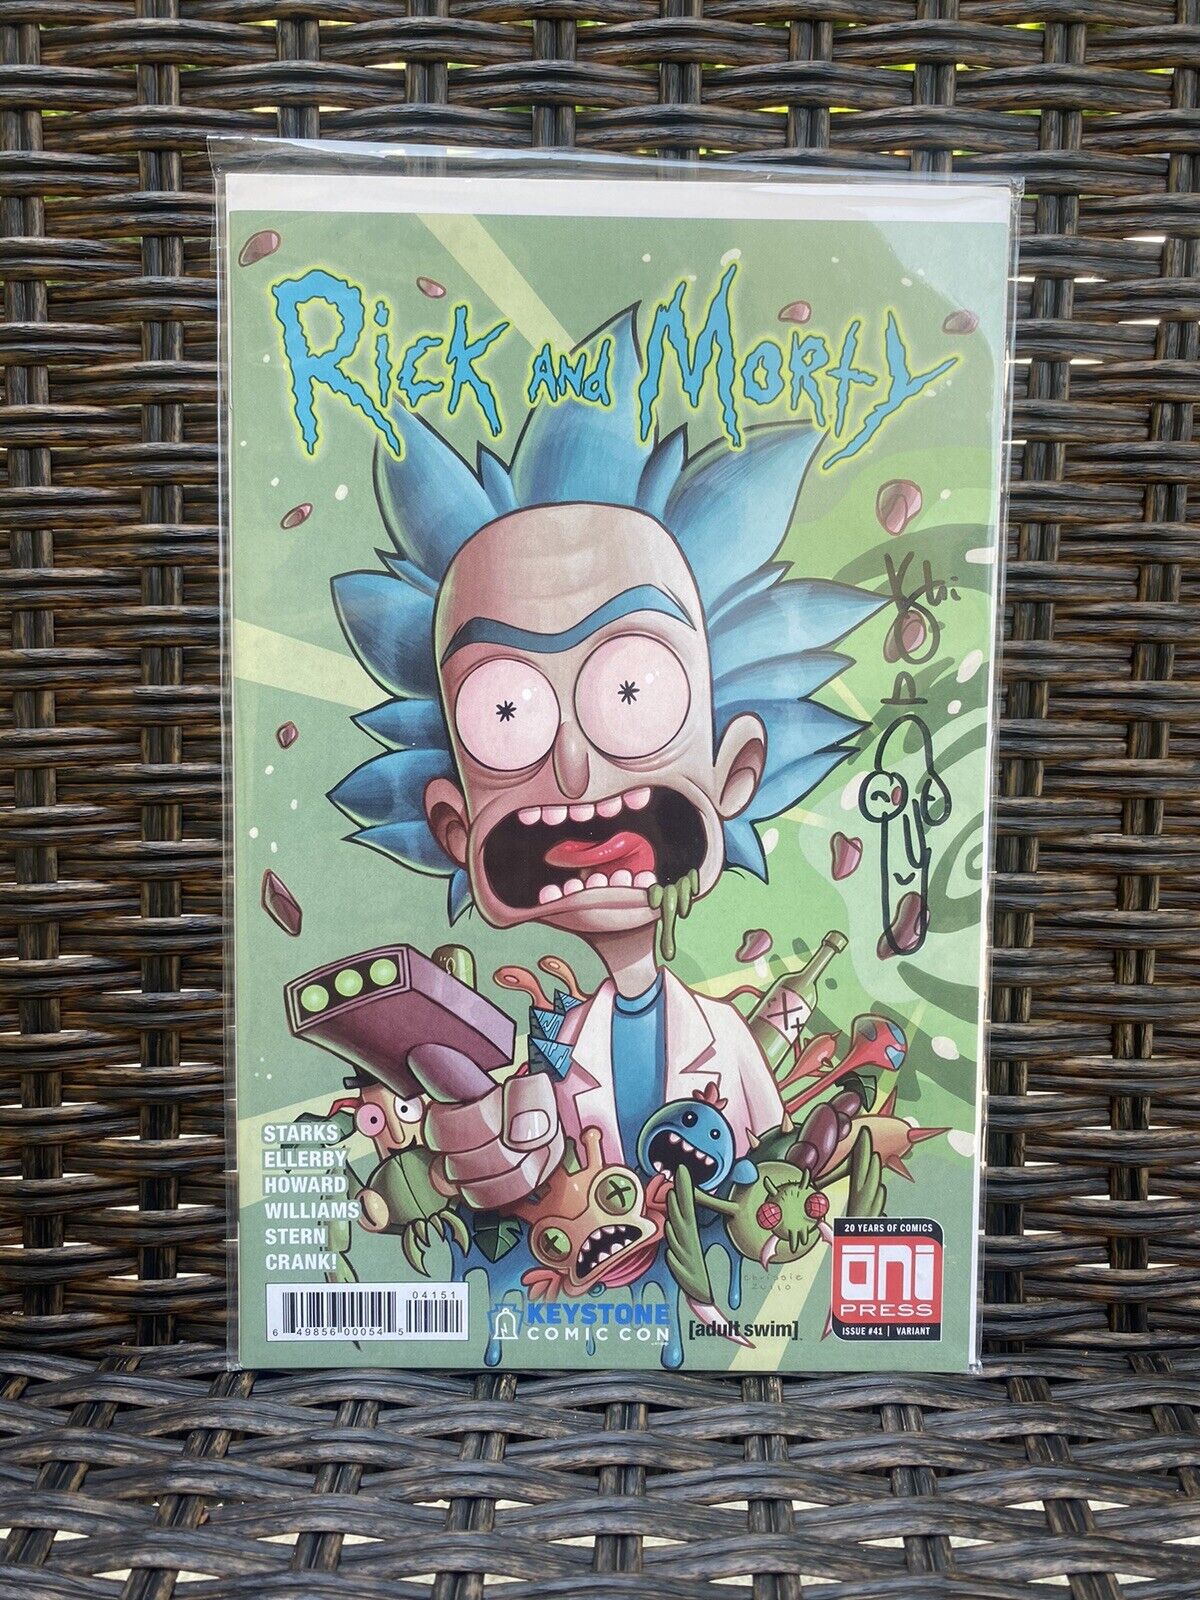 Rick and Morty #41 Keystone comic con signed by Kyle Starks with drawing